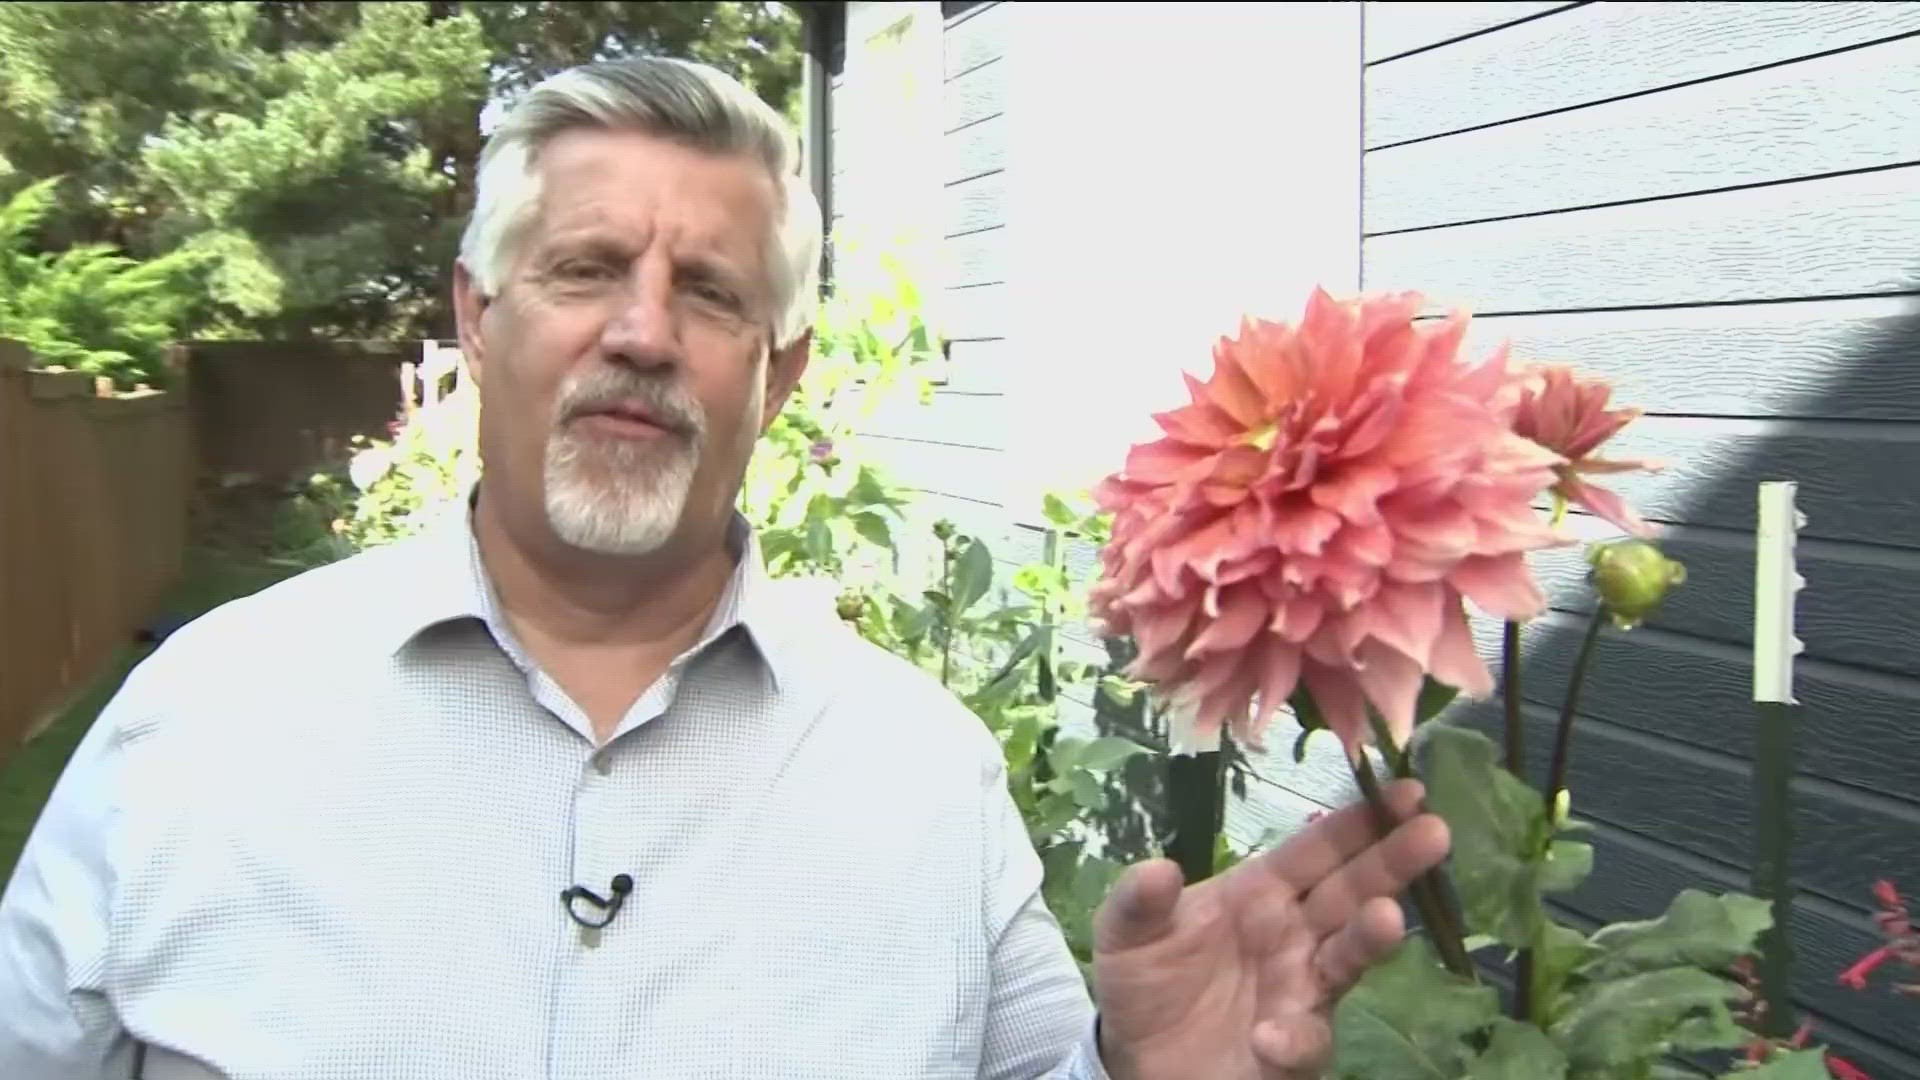 On this edition of You Can Grow It, Garden Master Jim Duthie showcases a Boise woman's dahlia garden and its variety of colors, sizes and shapes.